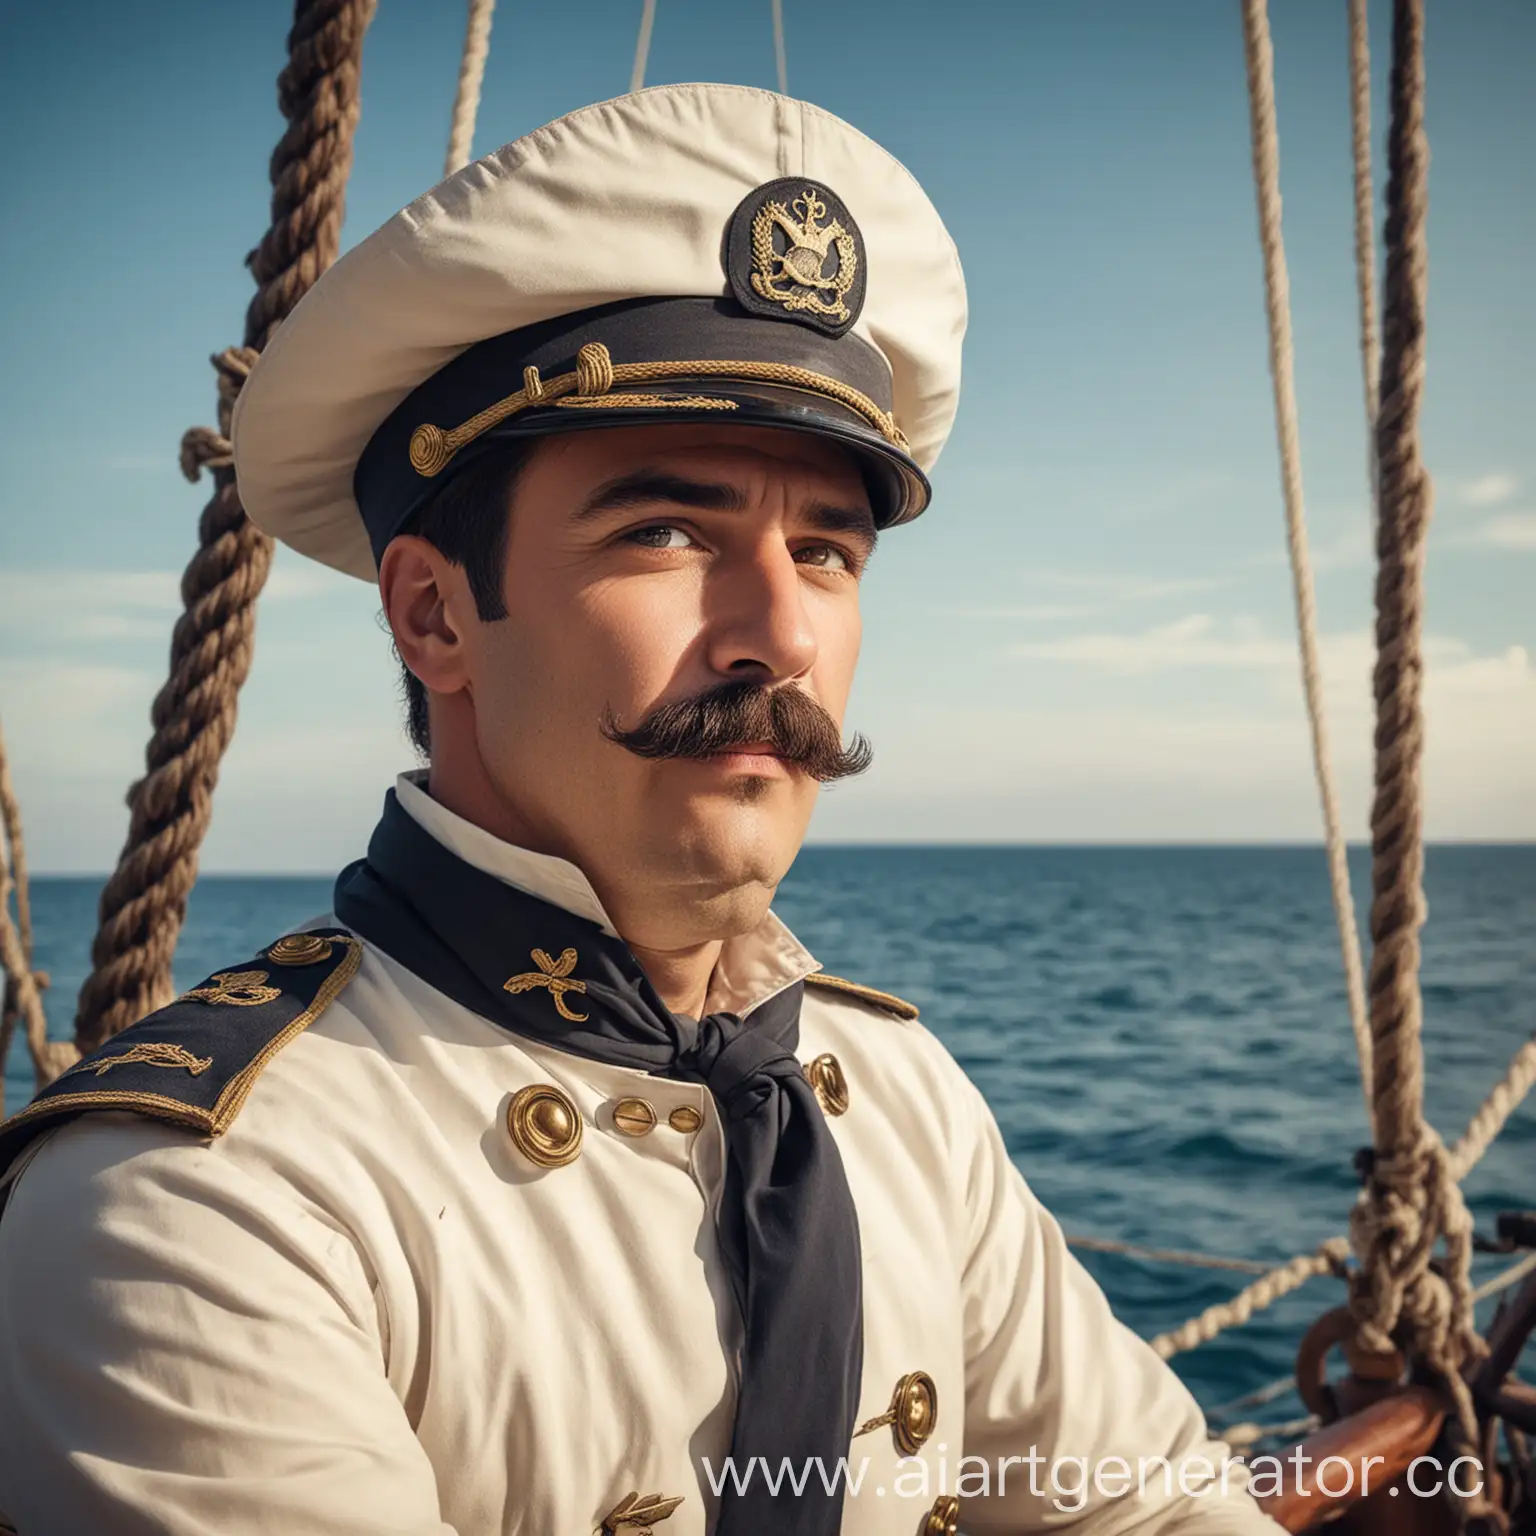 Captain-Man-with-Mustache-on-Sailing-Ship-Enjoying-Scenic-Sea-View